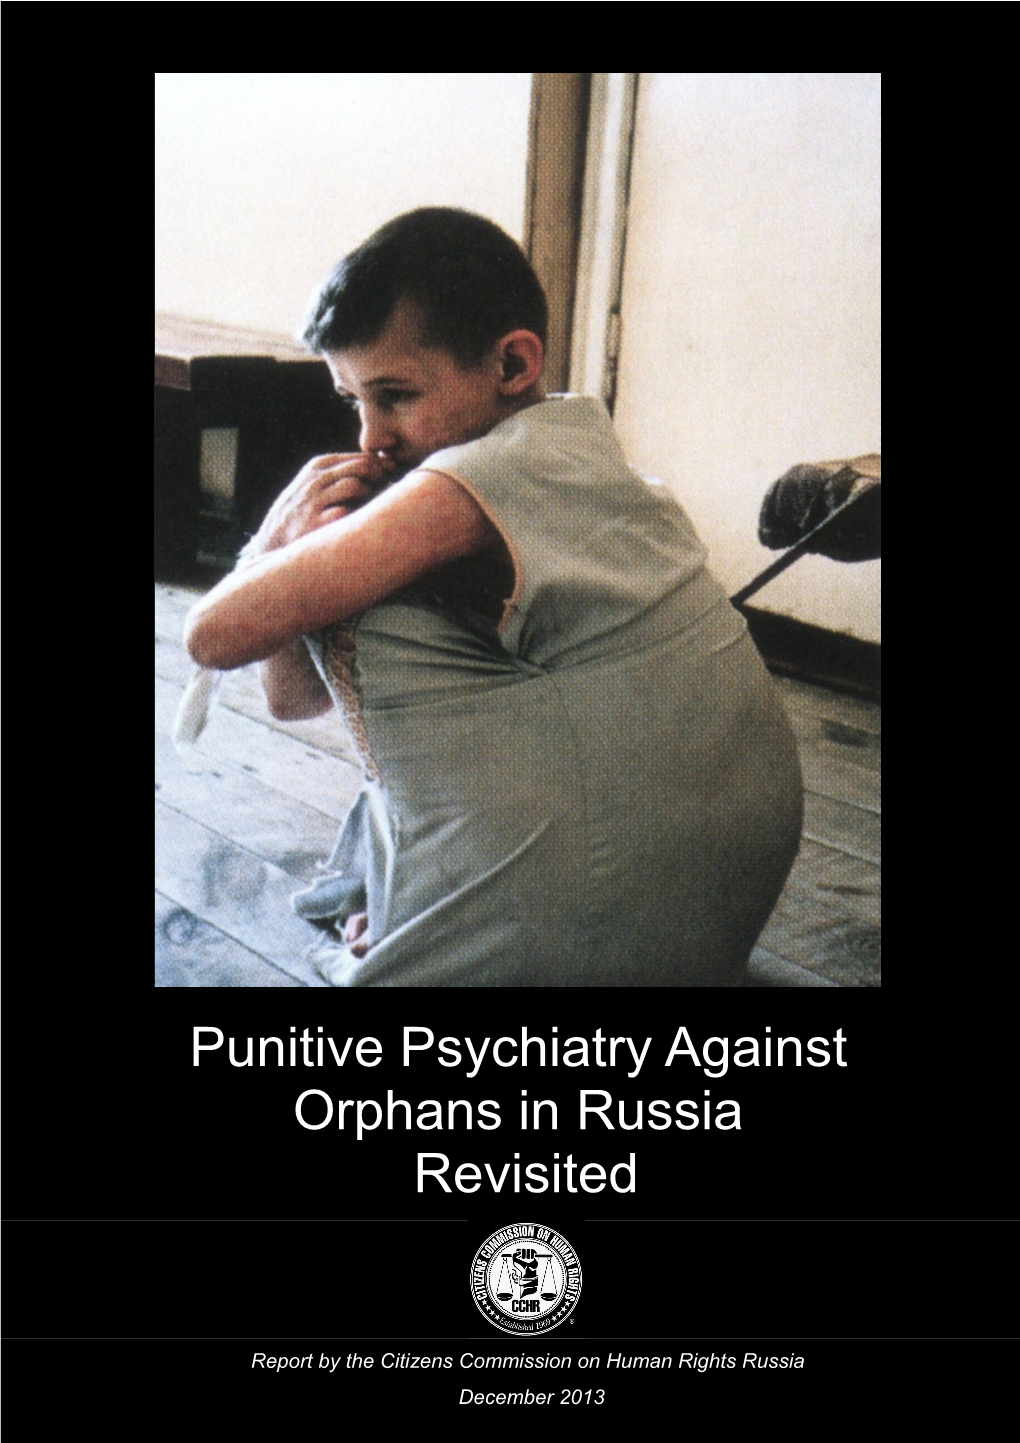 Punitive Psychiatry Against Orphans in Russia Revisited